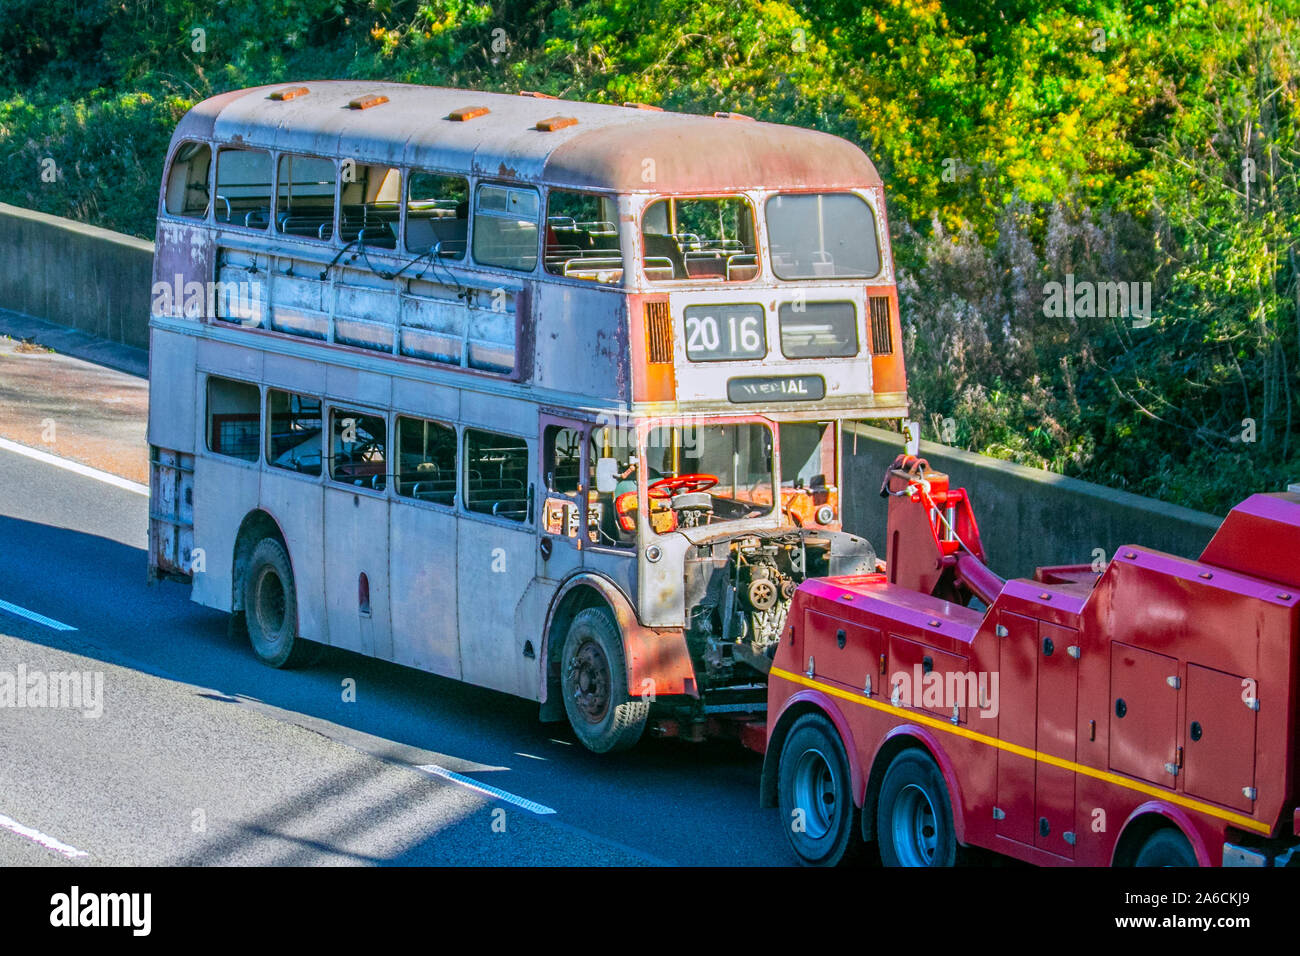 1950s-era automobiles barn garage find vehicle restoration project; Vintage bus towed on car trailer for restoration. UK Vehicular traffic derelict condition, rare collectible vintage classic transport, vintage, old buses, classics north-bound on the 3 lane M6 Motorway highway. Stock Photo